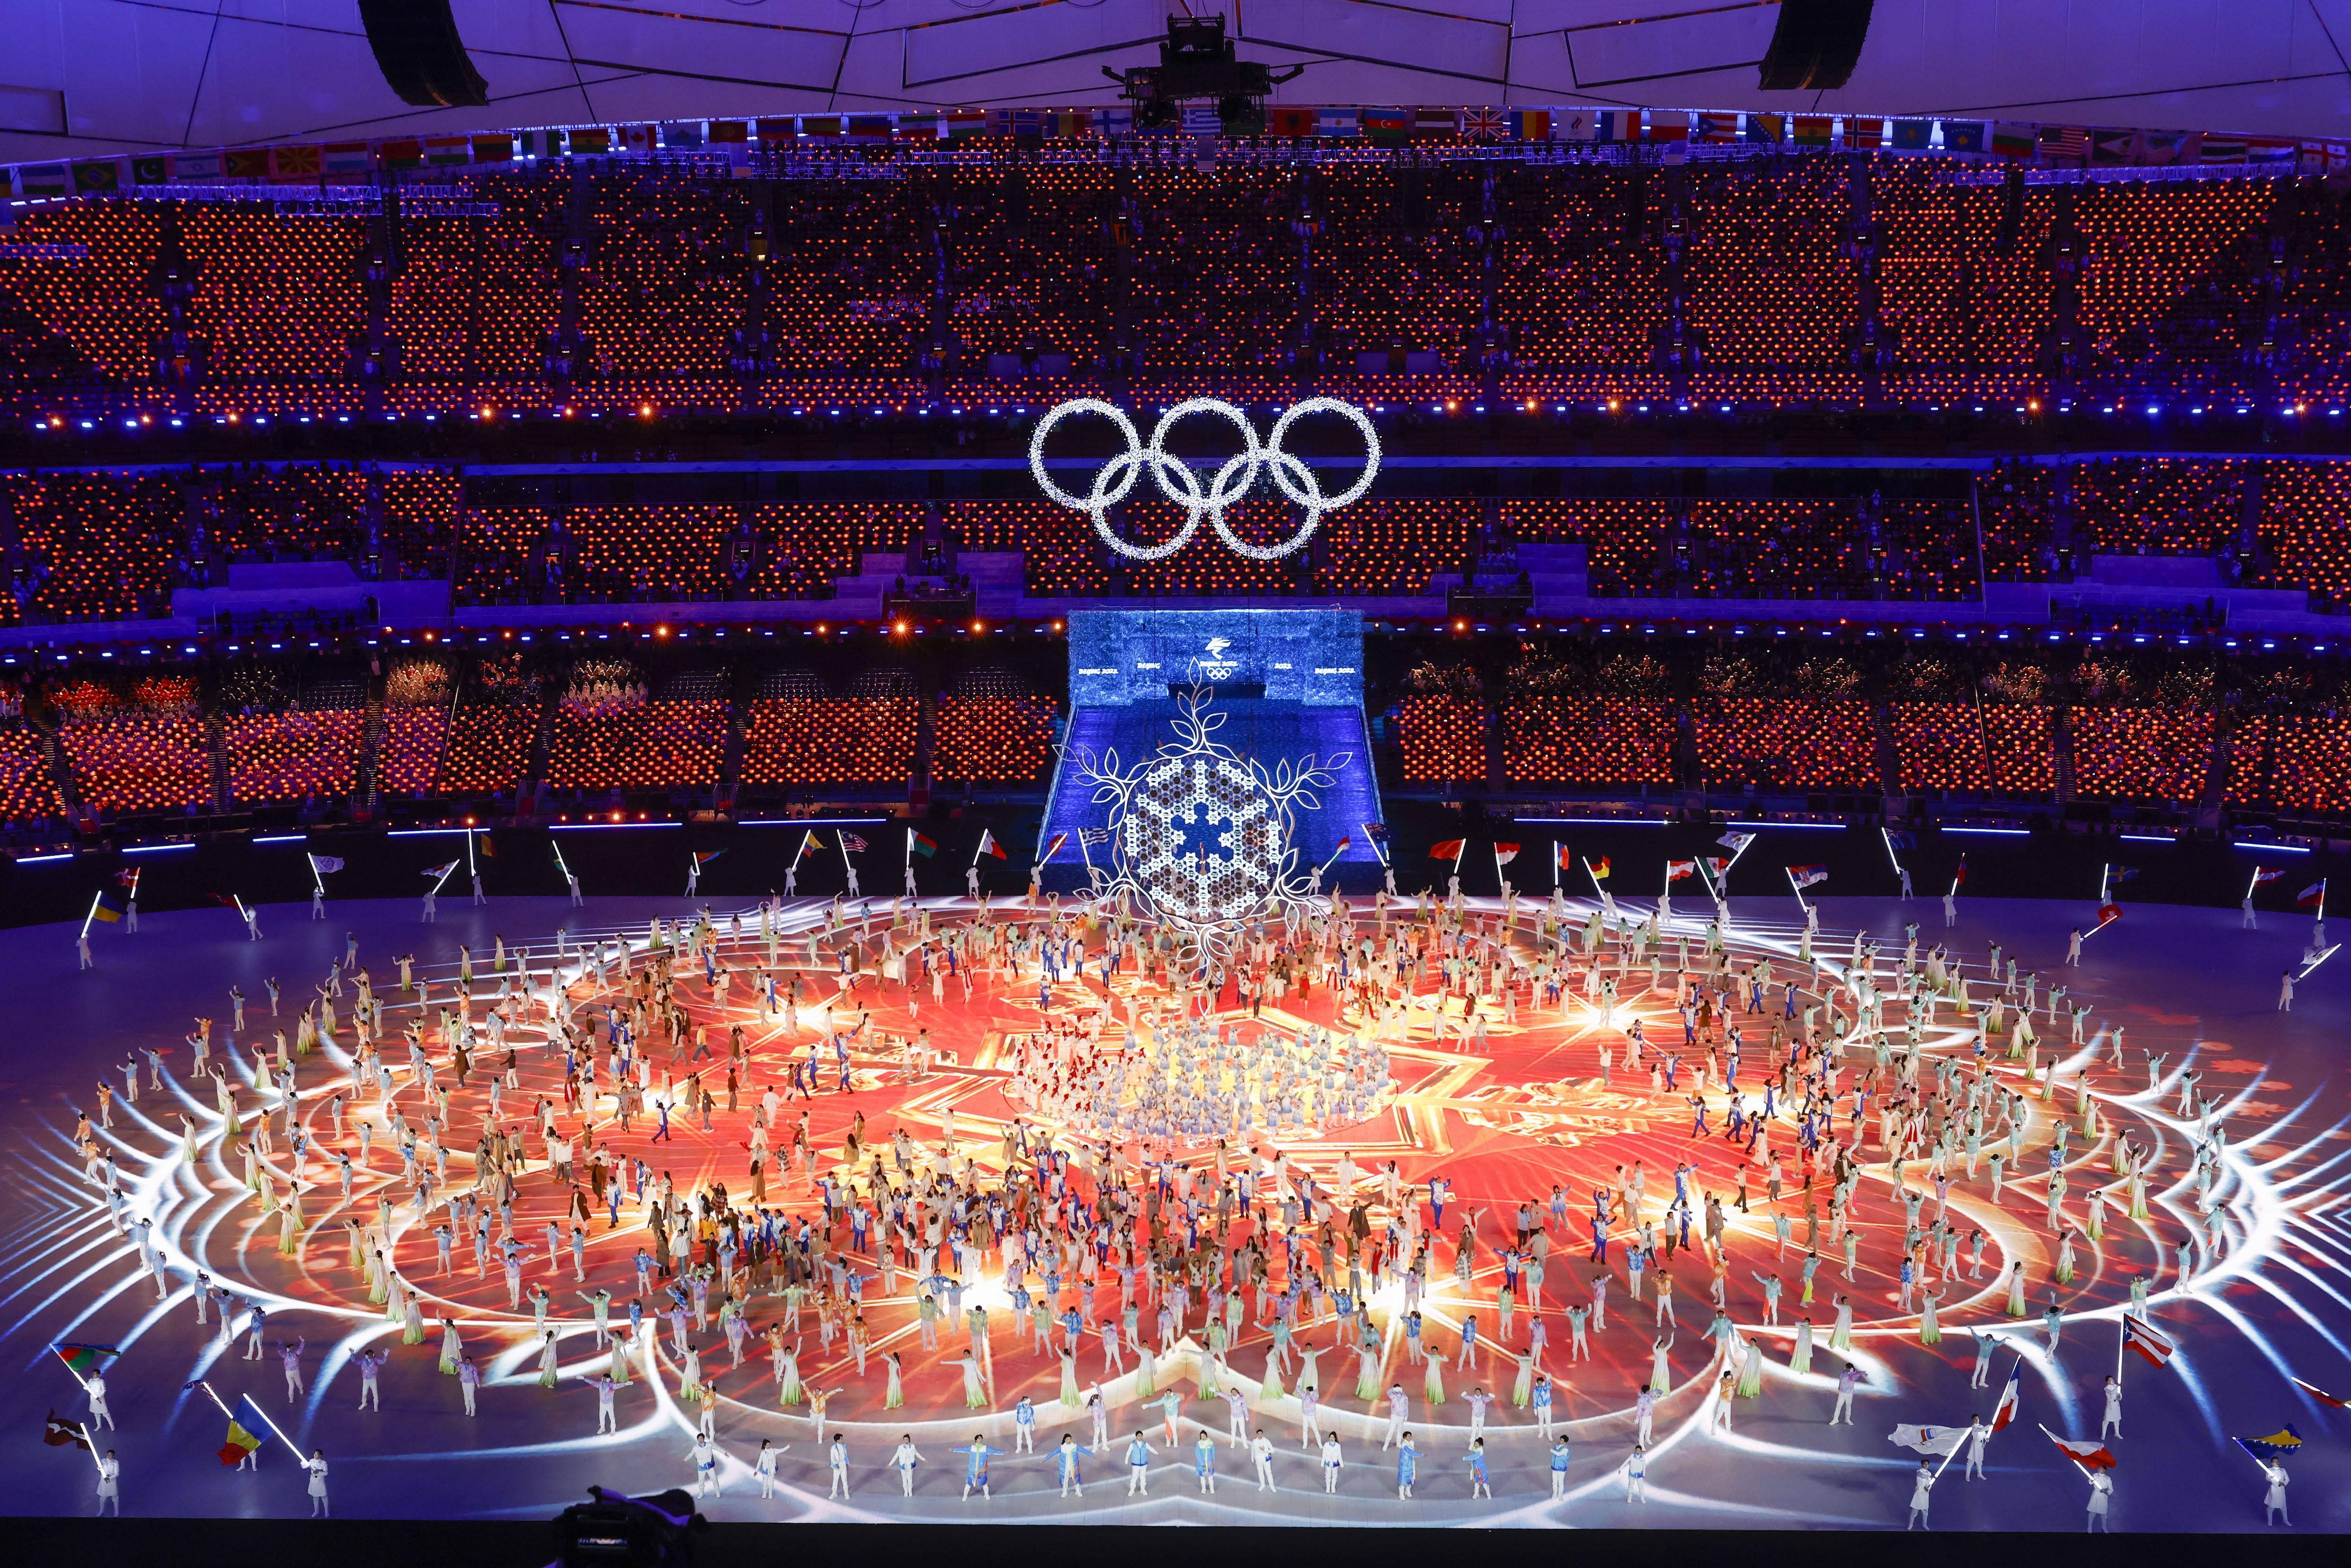 One World, One Family': Beijing Winter Olympics close with stunning ceremony